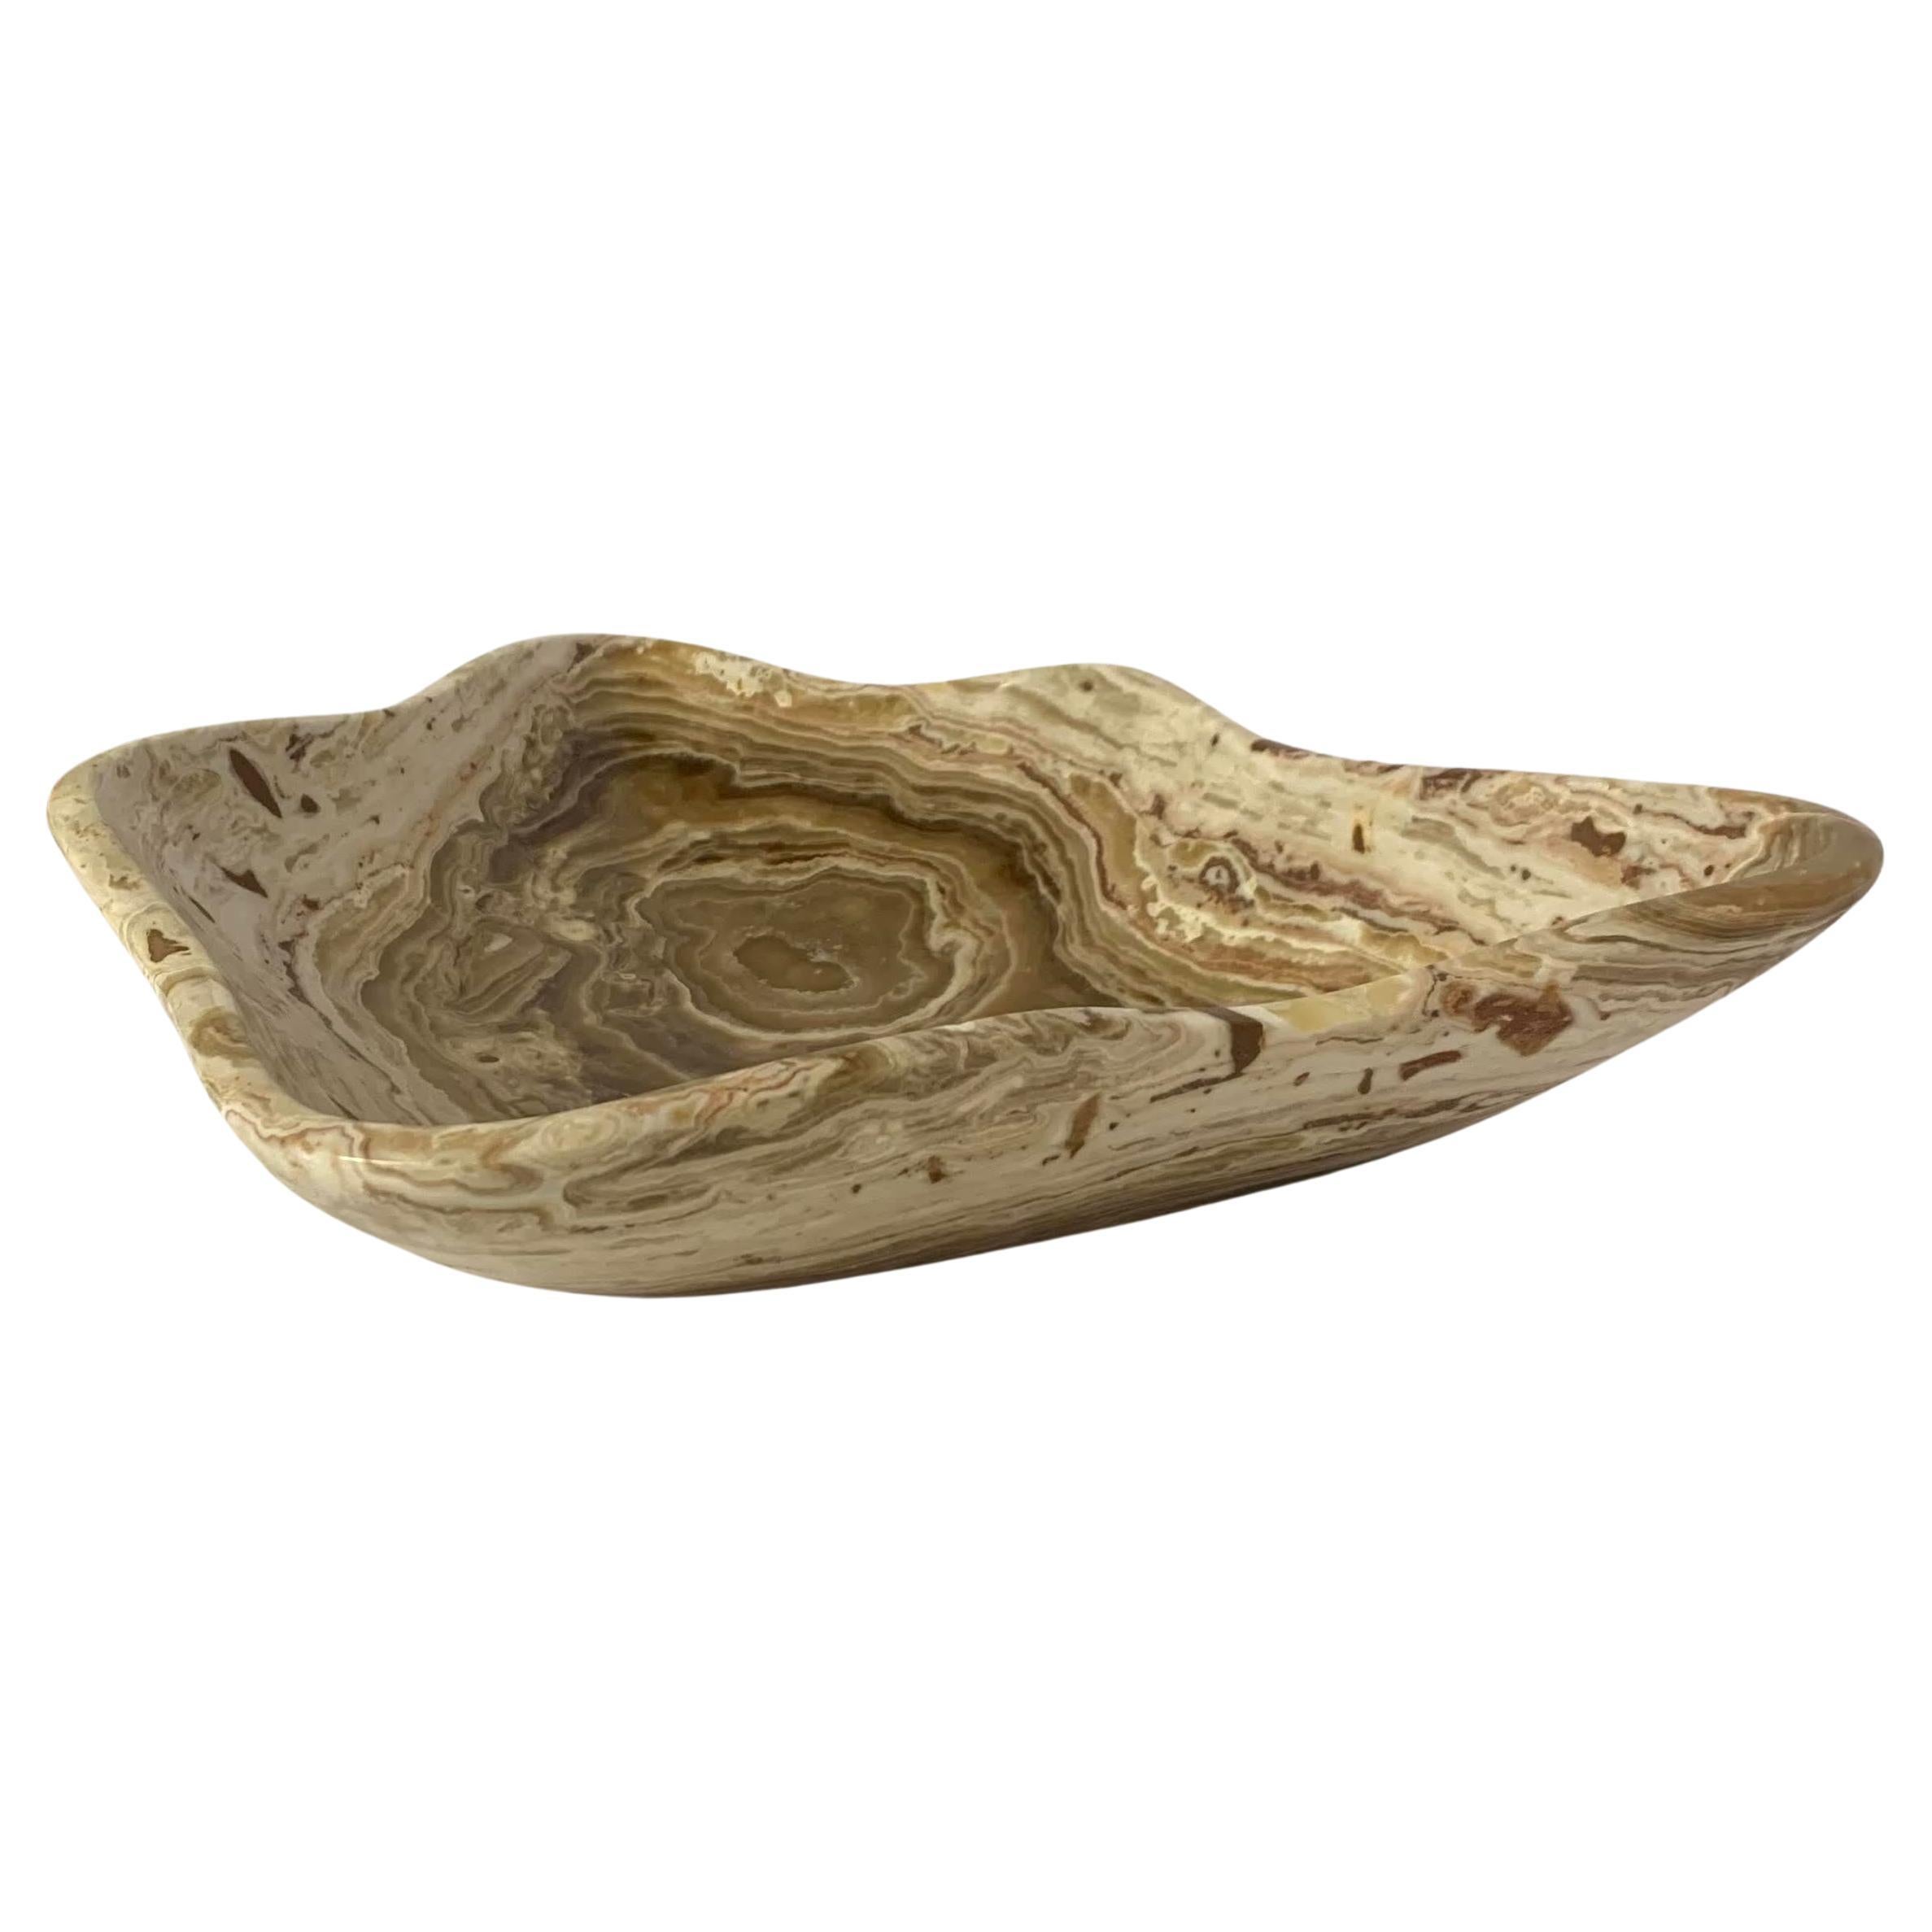 Tan And Cream Free Form Shaped Onyx Bowl, Moroccan, Contemporary For Sale